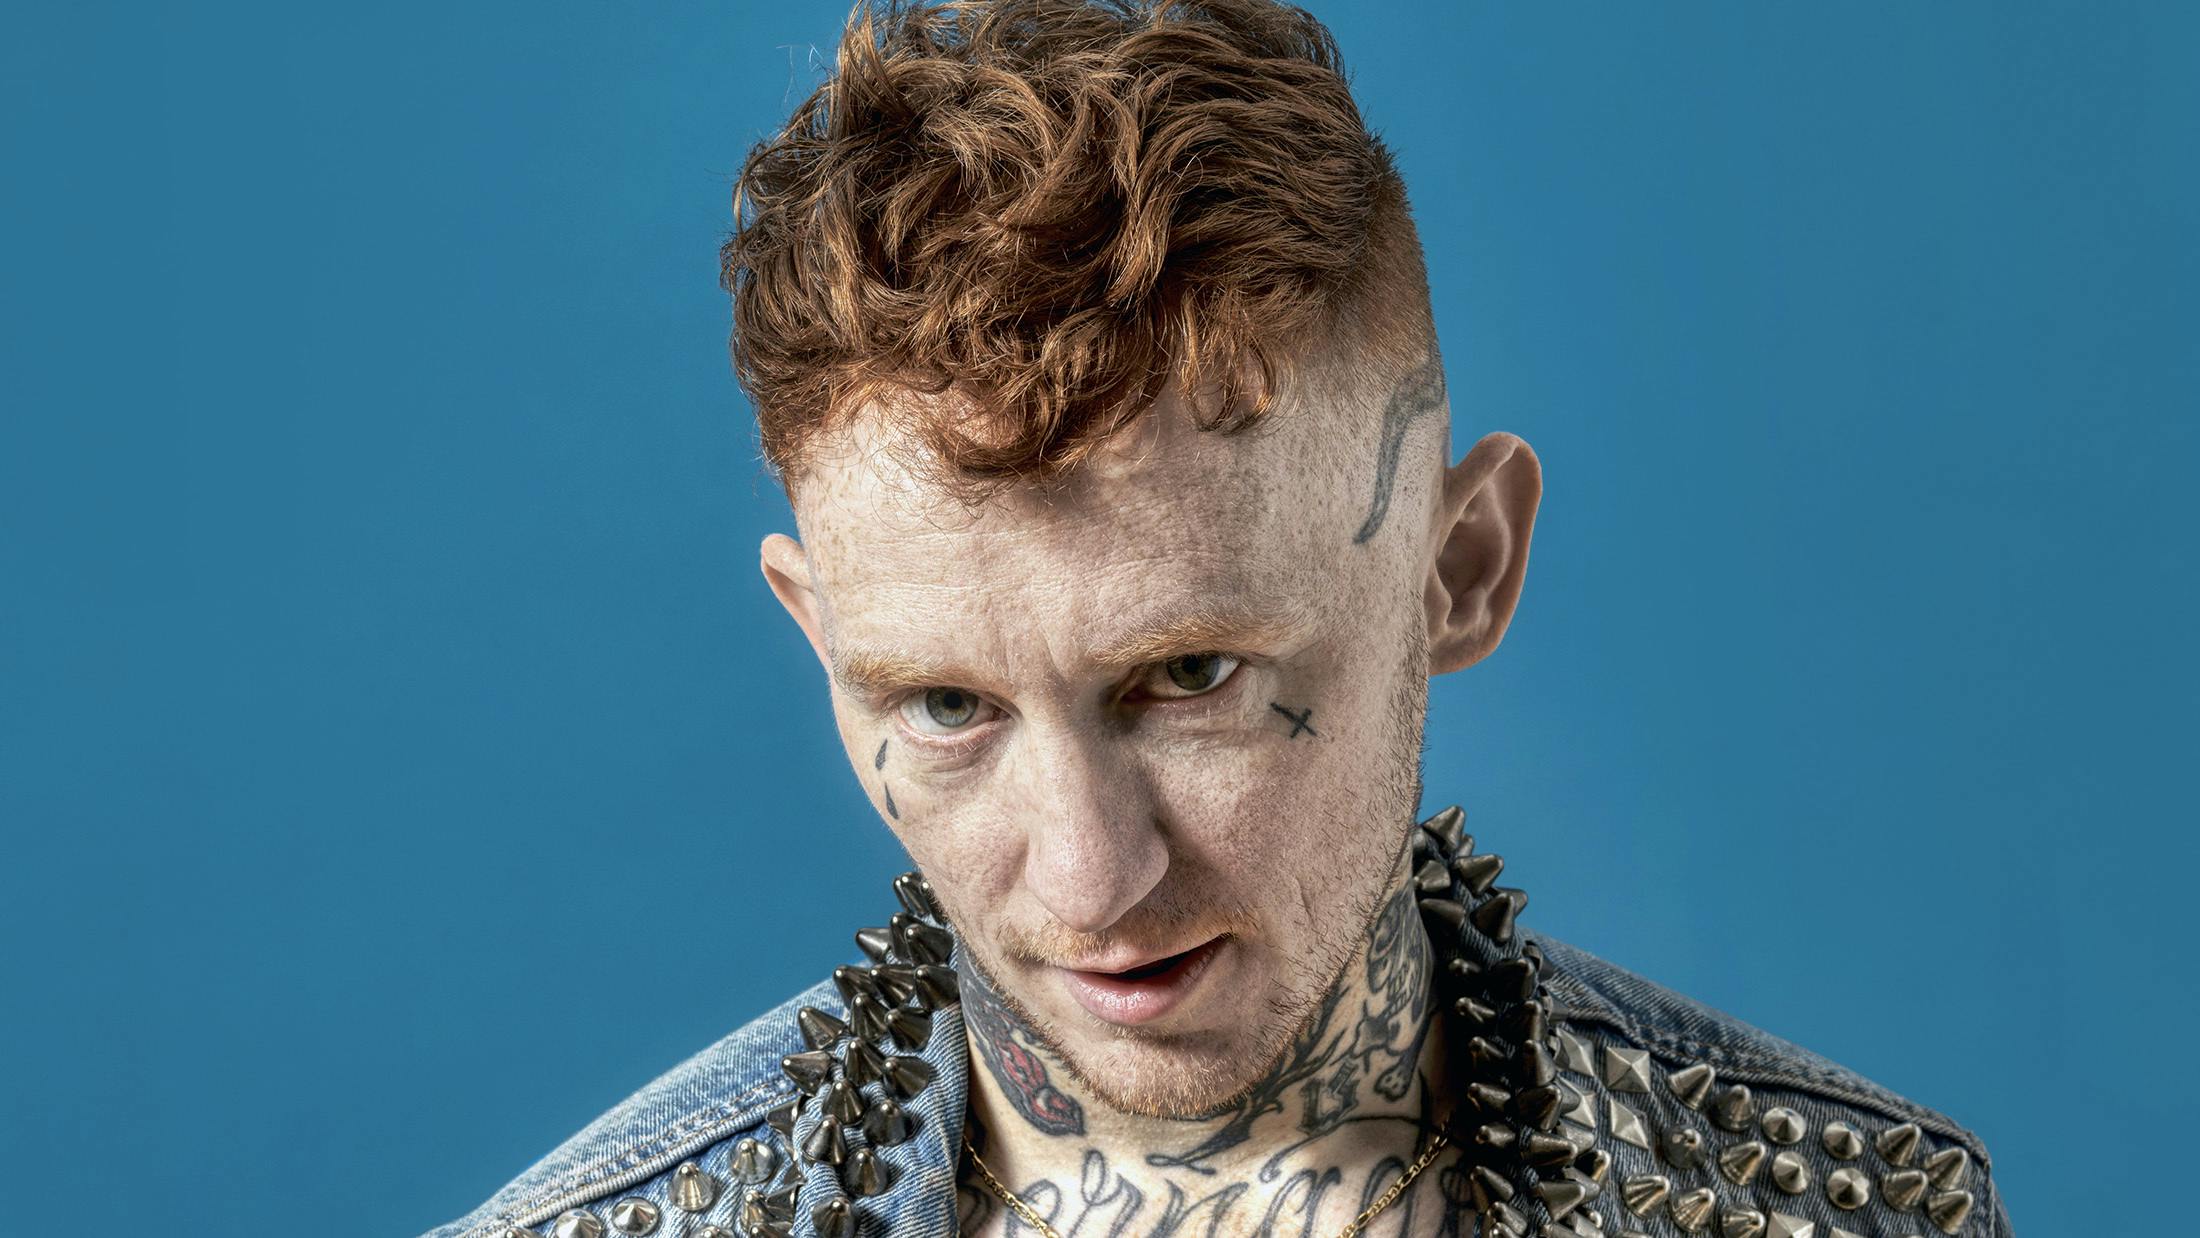 Frank Carter: The 10 songs that changed my life